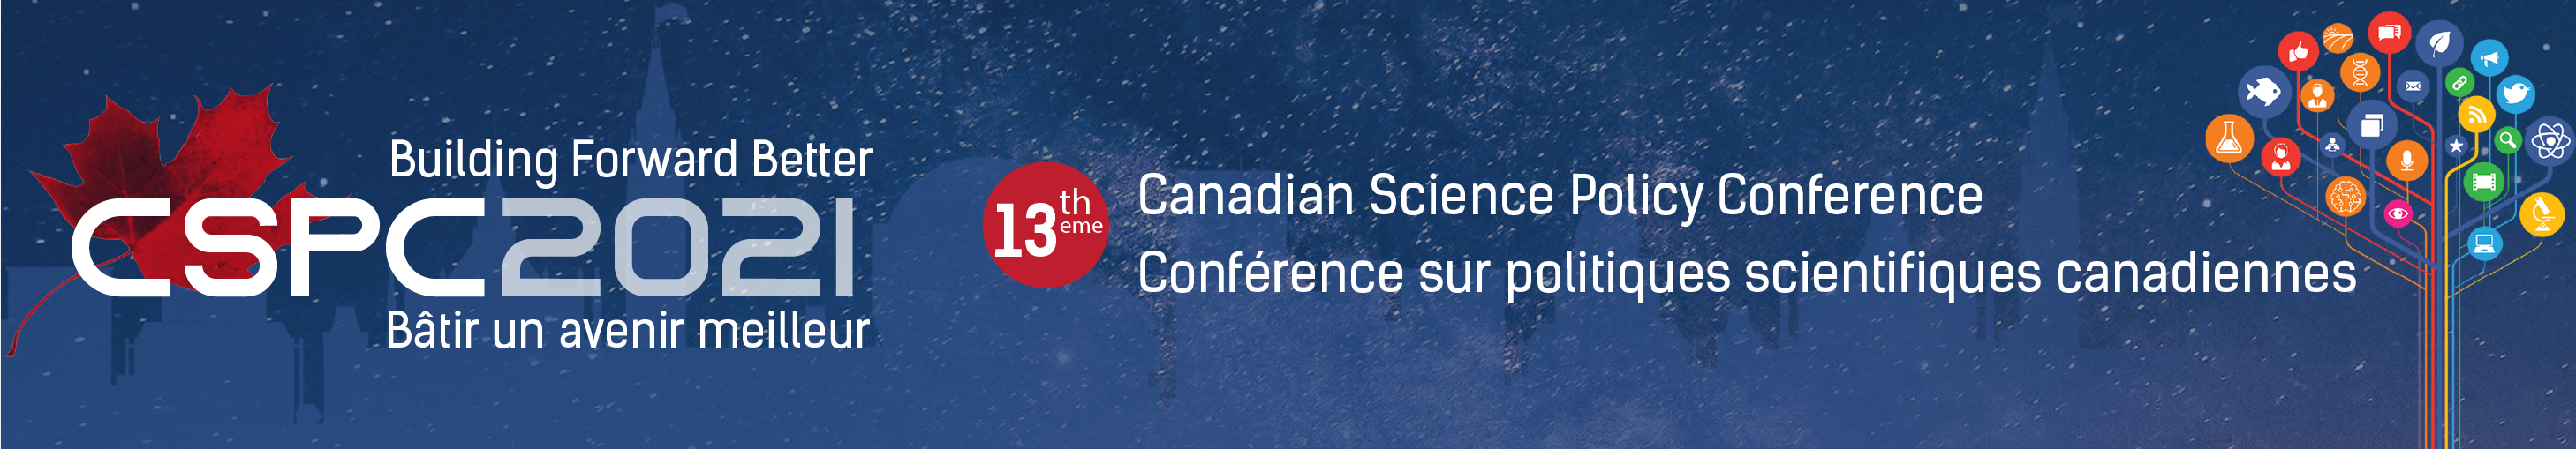 Banner for the CSPC 2021 conference with a starry night background and the works "Building Forward Better - 13th Canadian Science Policy Conference'